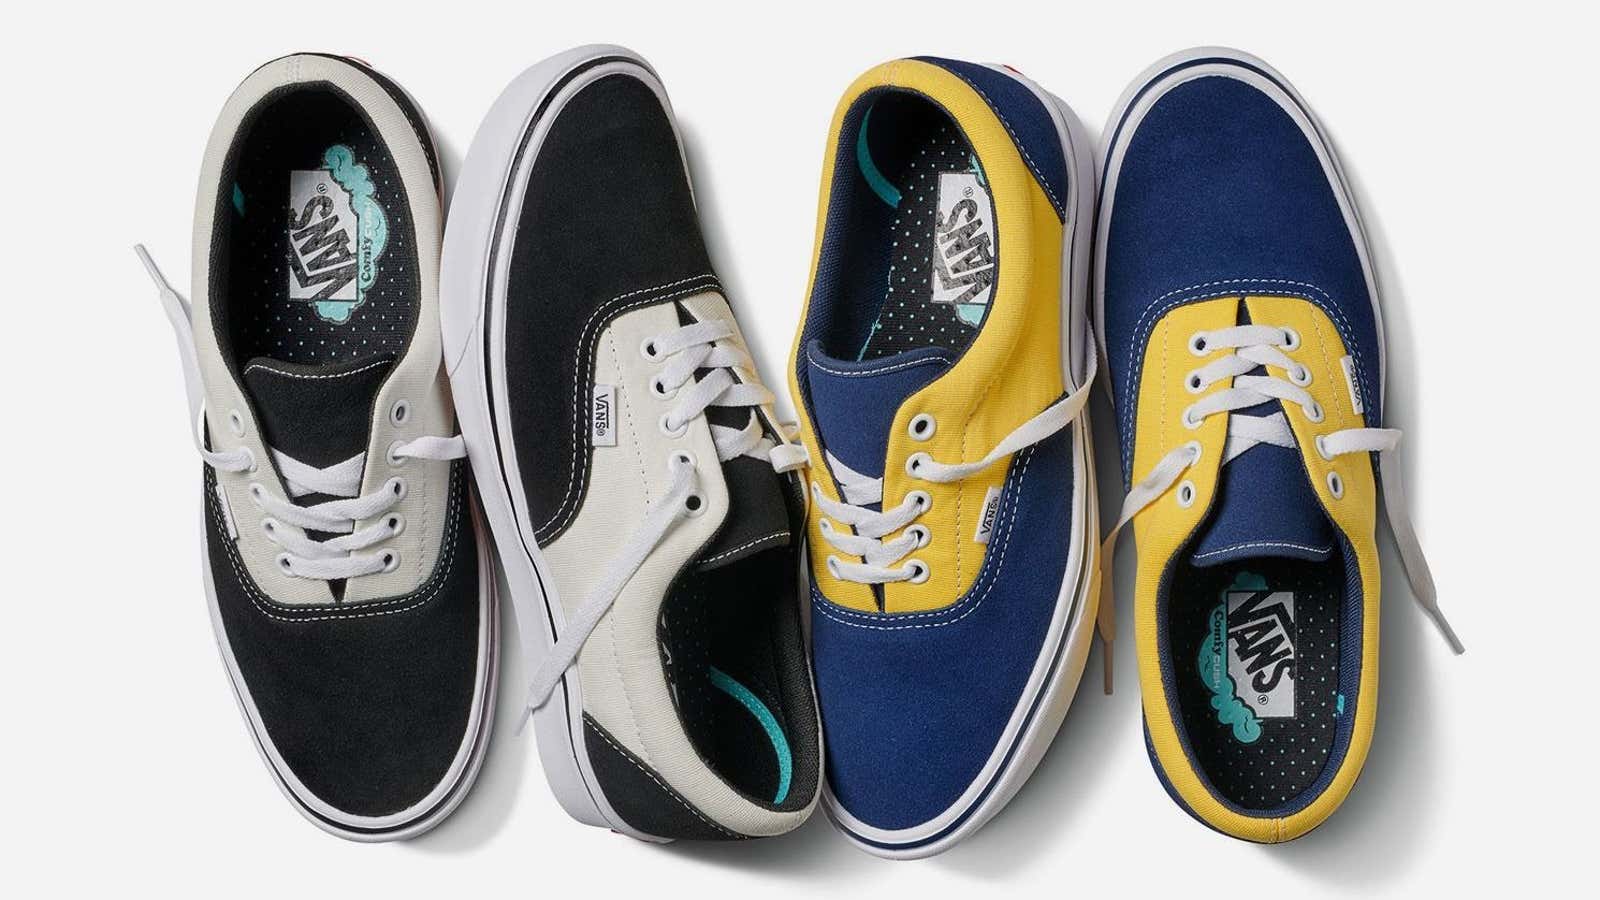 Vans is sneaking modern cushioning into its classic skate shoes.